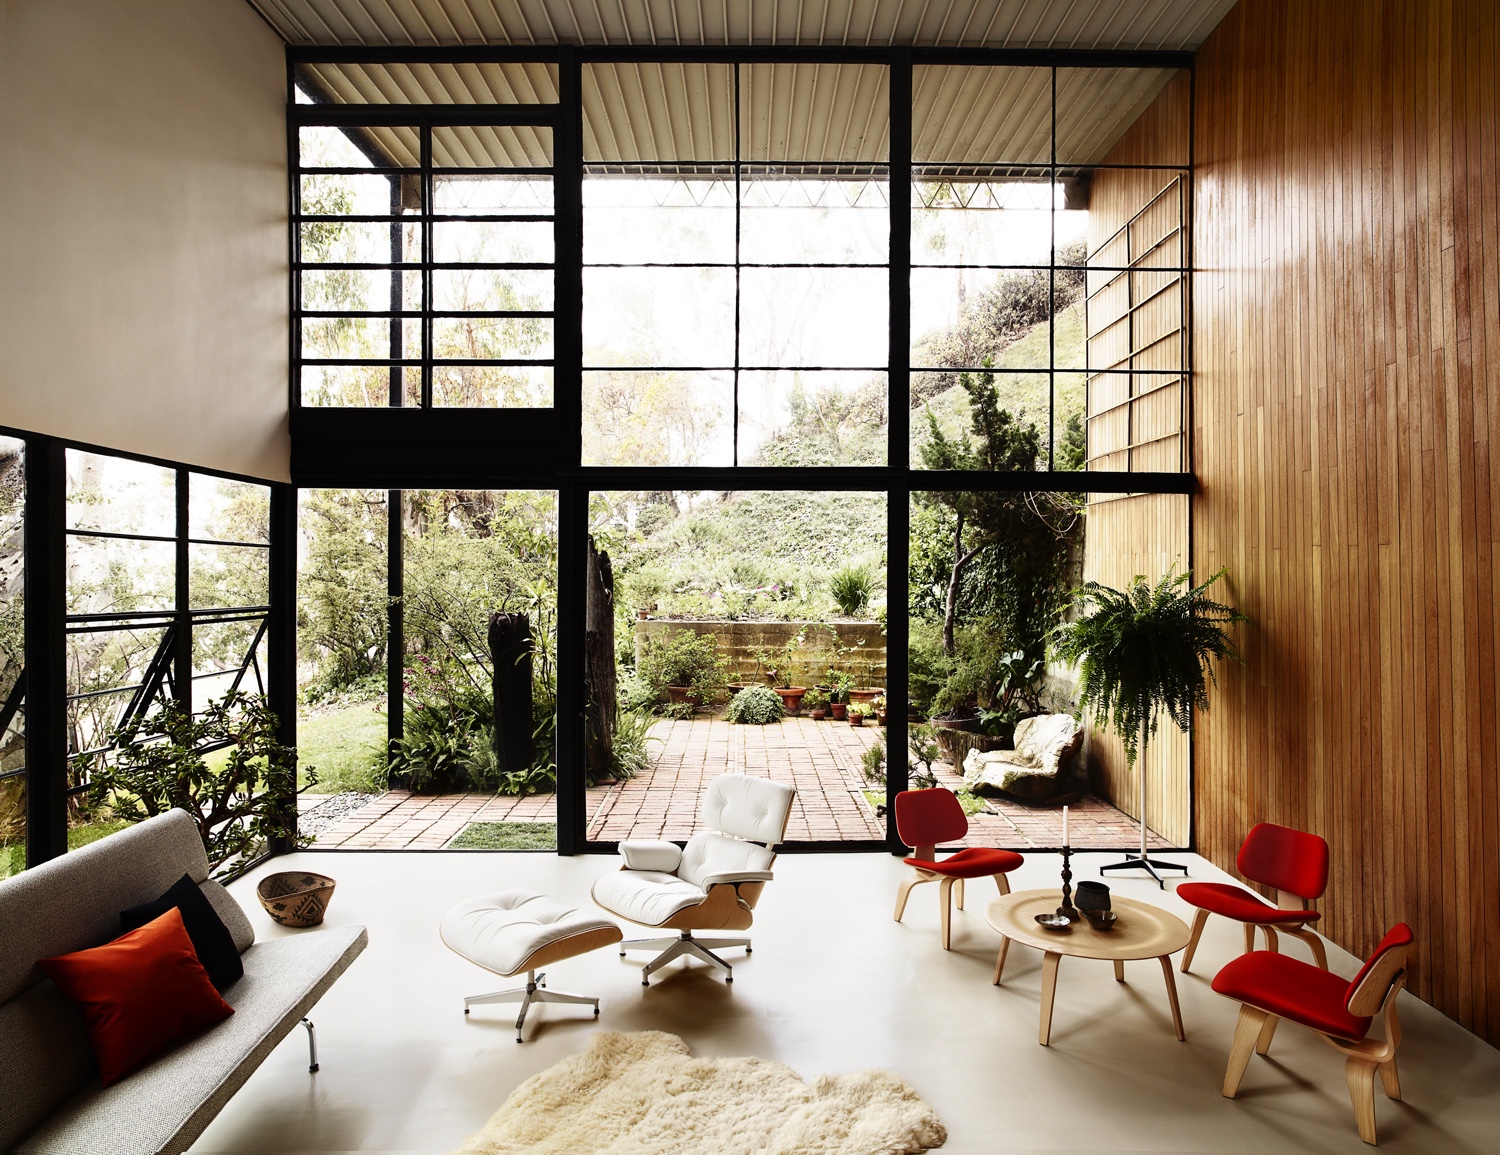 Eames House Living Room Design Classic Stories: The Eames Lounge Chair and Ottoman